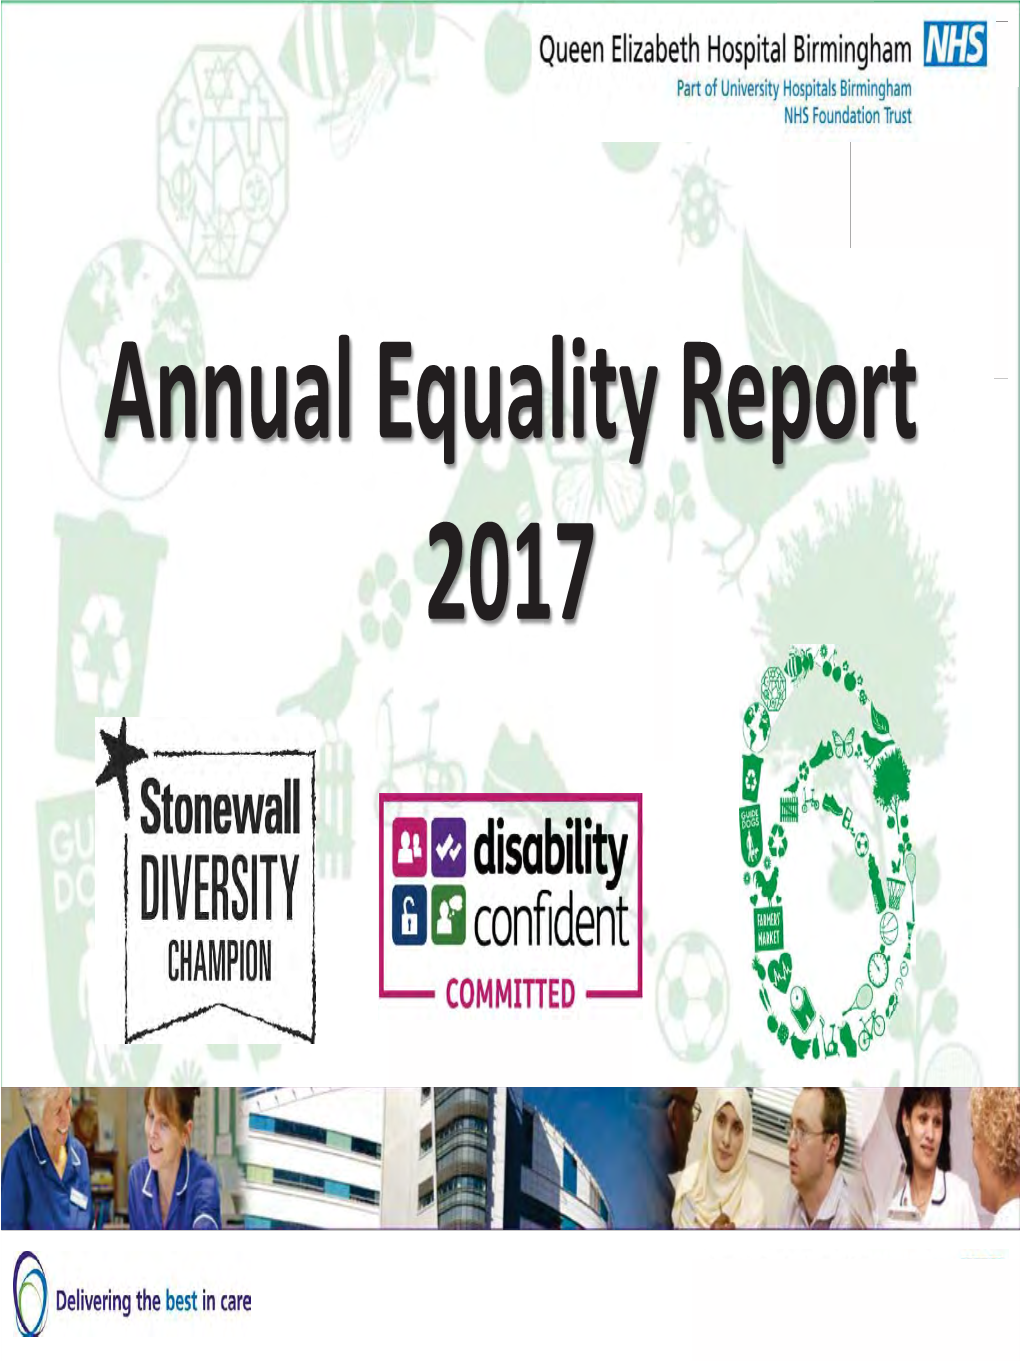 Annual Equality and Diversity Report (2017)